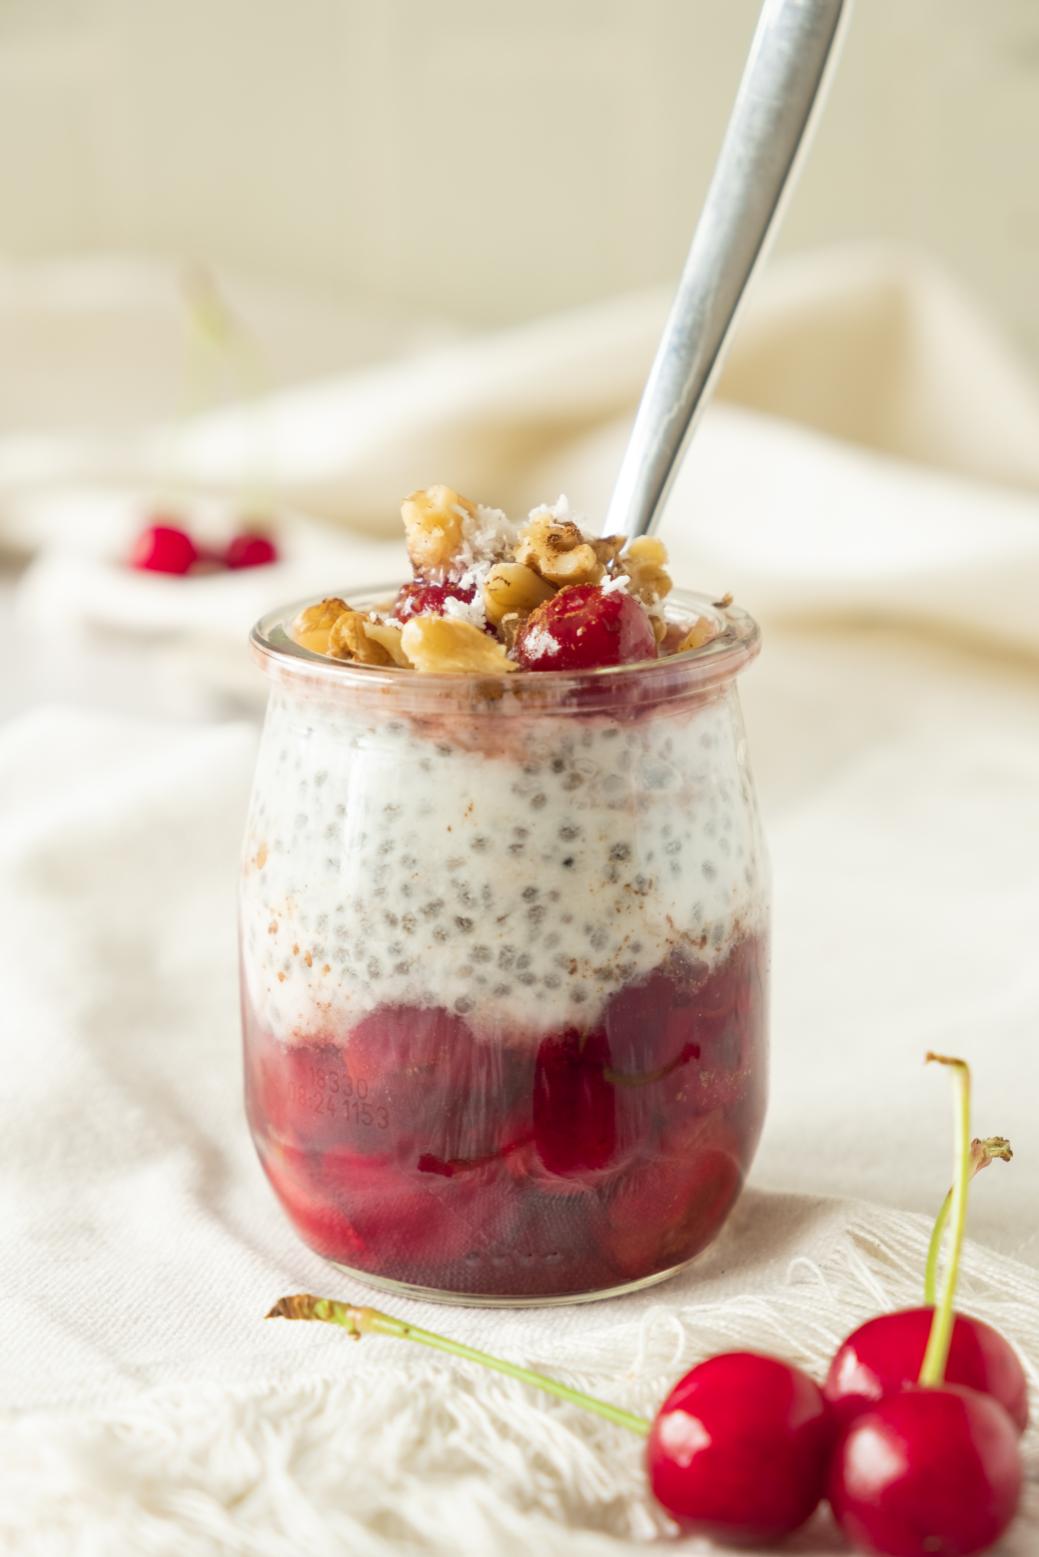 A jar of layered cherry chia pudding with a red fruit compote and a garnish of fresh cherries and chopped nuts, ready to be enjoyed as a healthy and delicious treat.